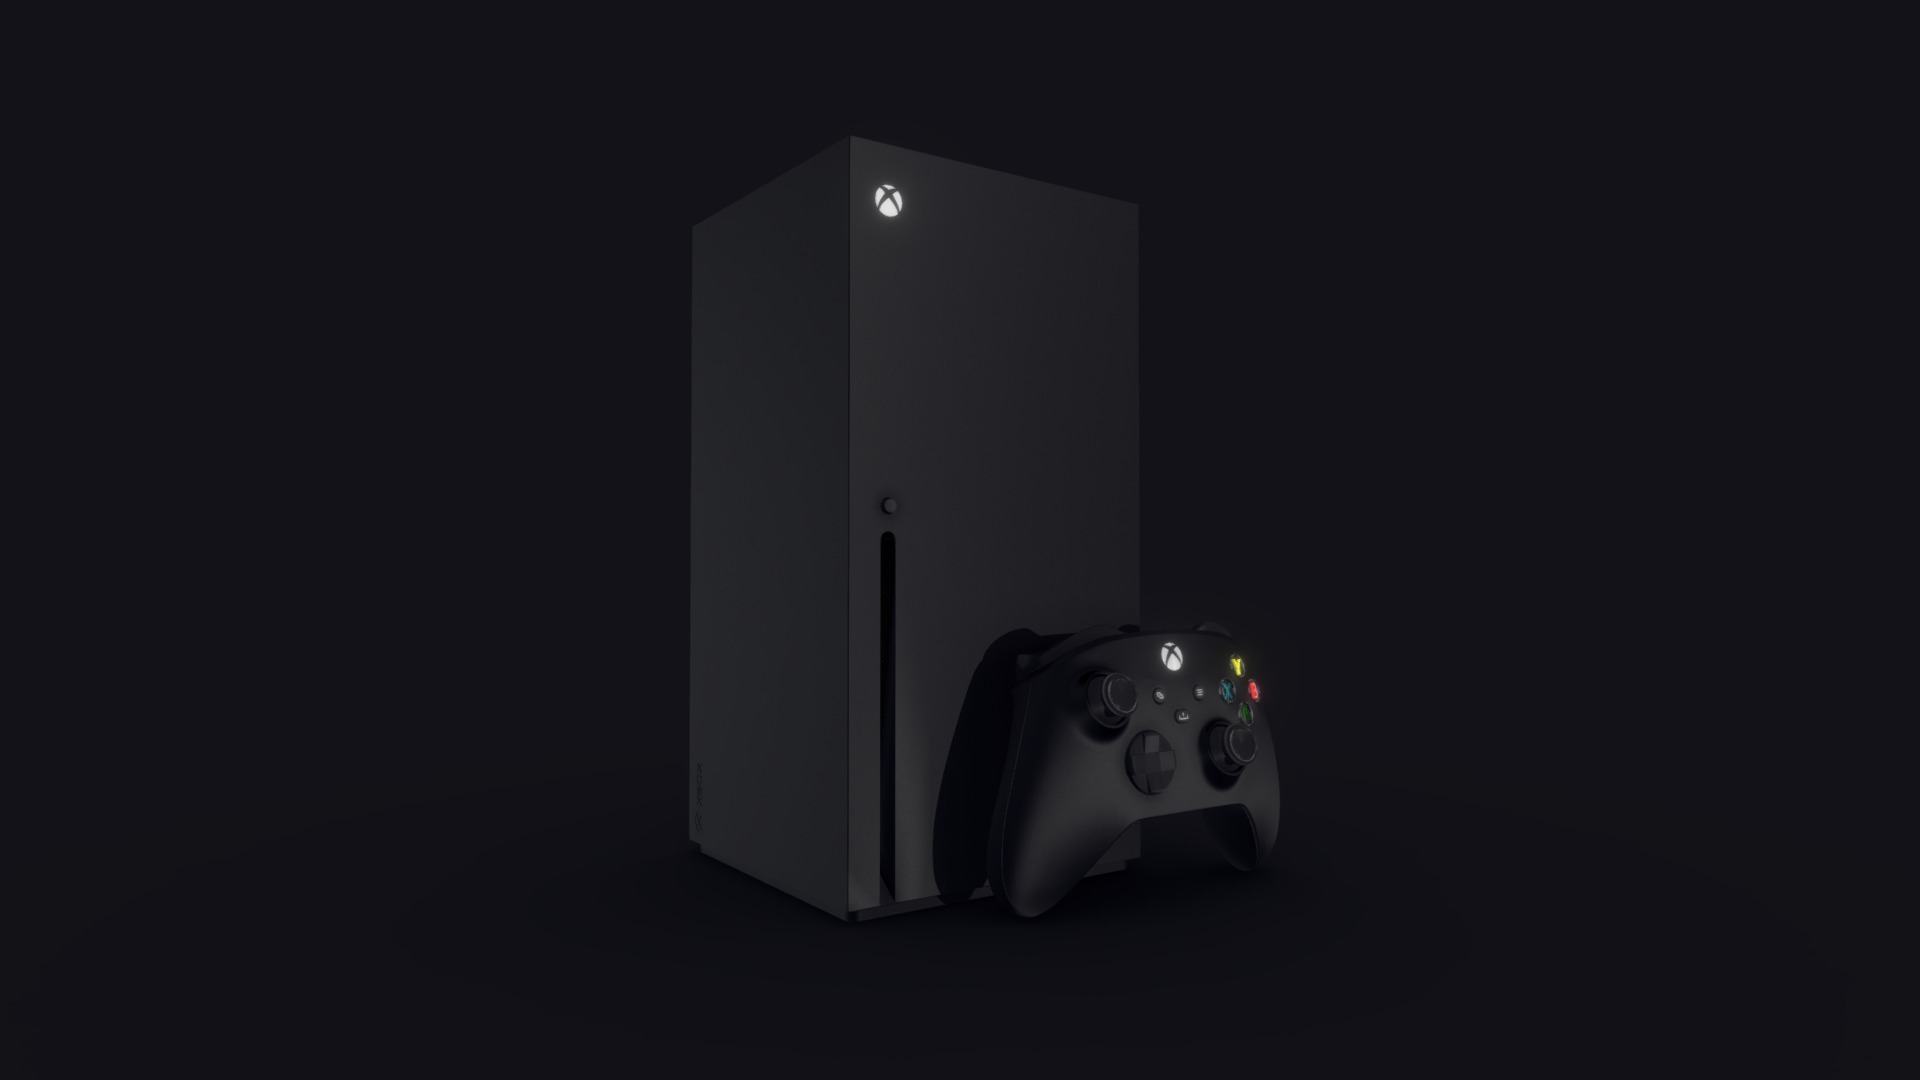 3D model X-box Series X - This is a 3D model of the X-box Series X. The 3D model is about a gaming console with a controller.